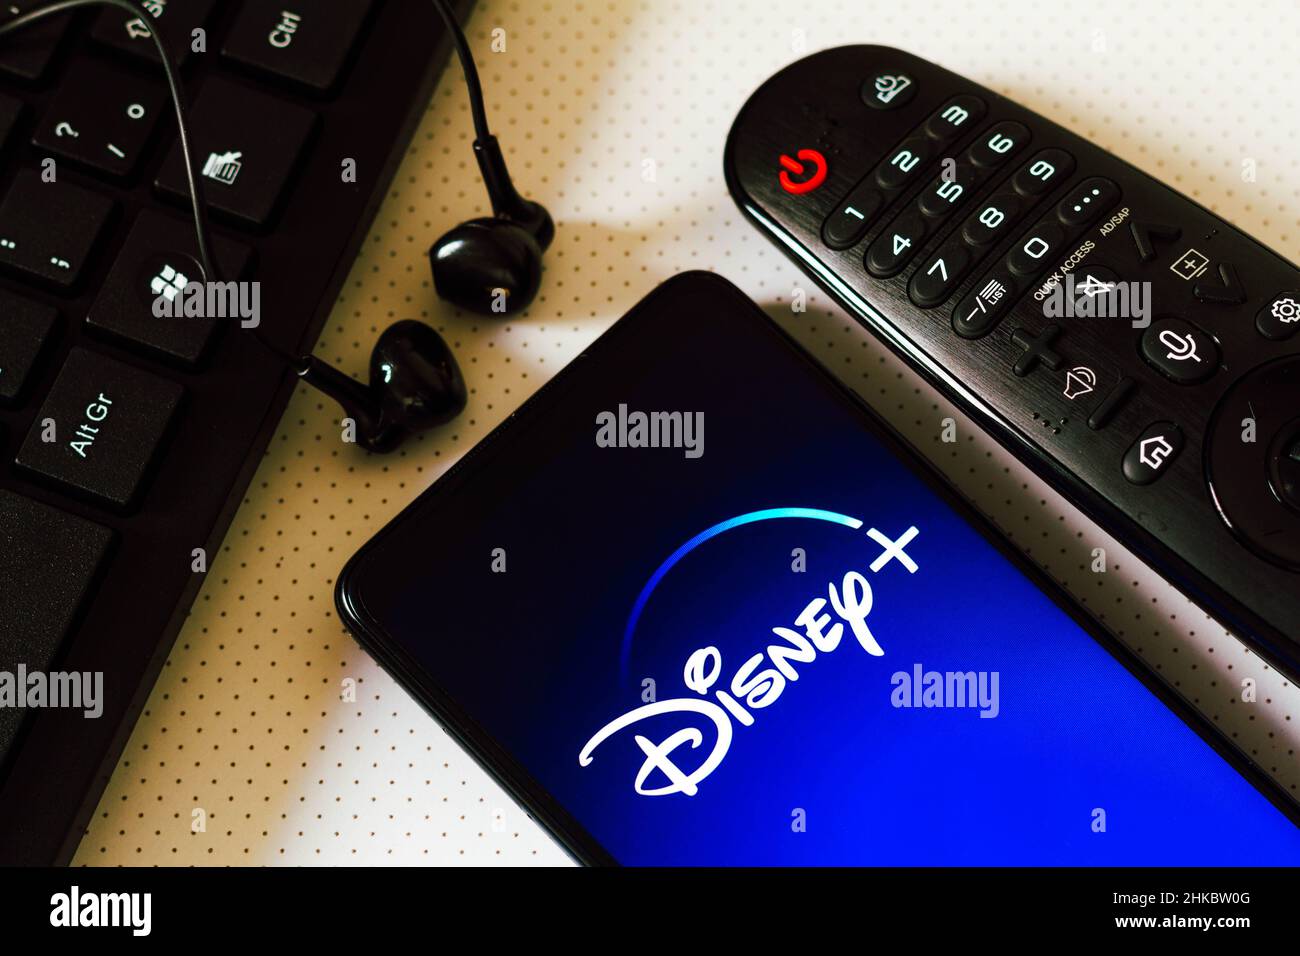 In this photo illustration, the logo of the Disney+ (Disney Plus), a subscription over-the-top video-on-demand streaming service seen displayed on a smart phone next a Tv remote control, earphones and a keyboard